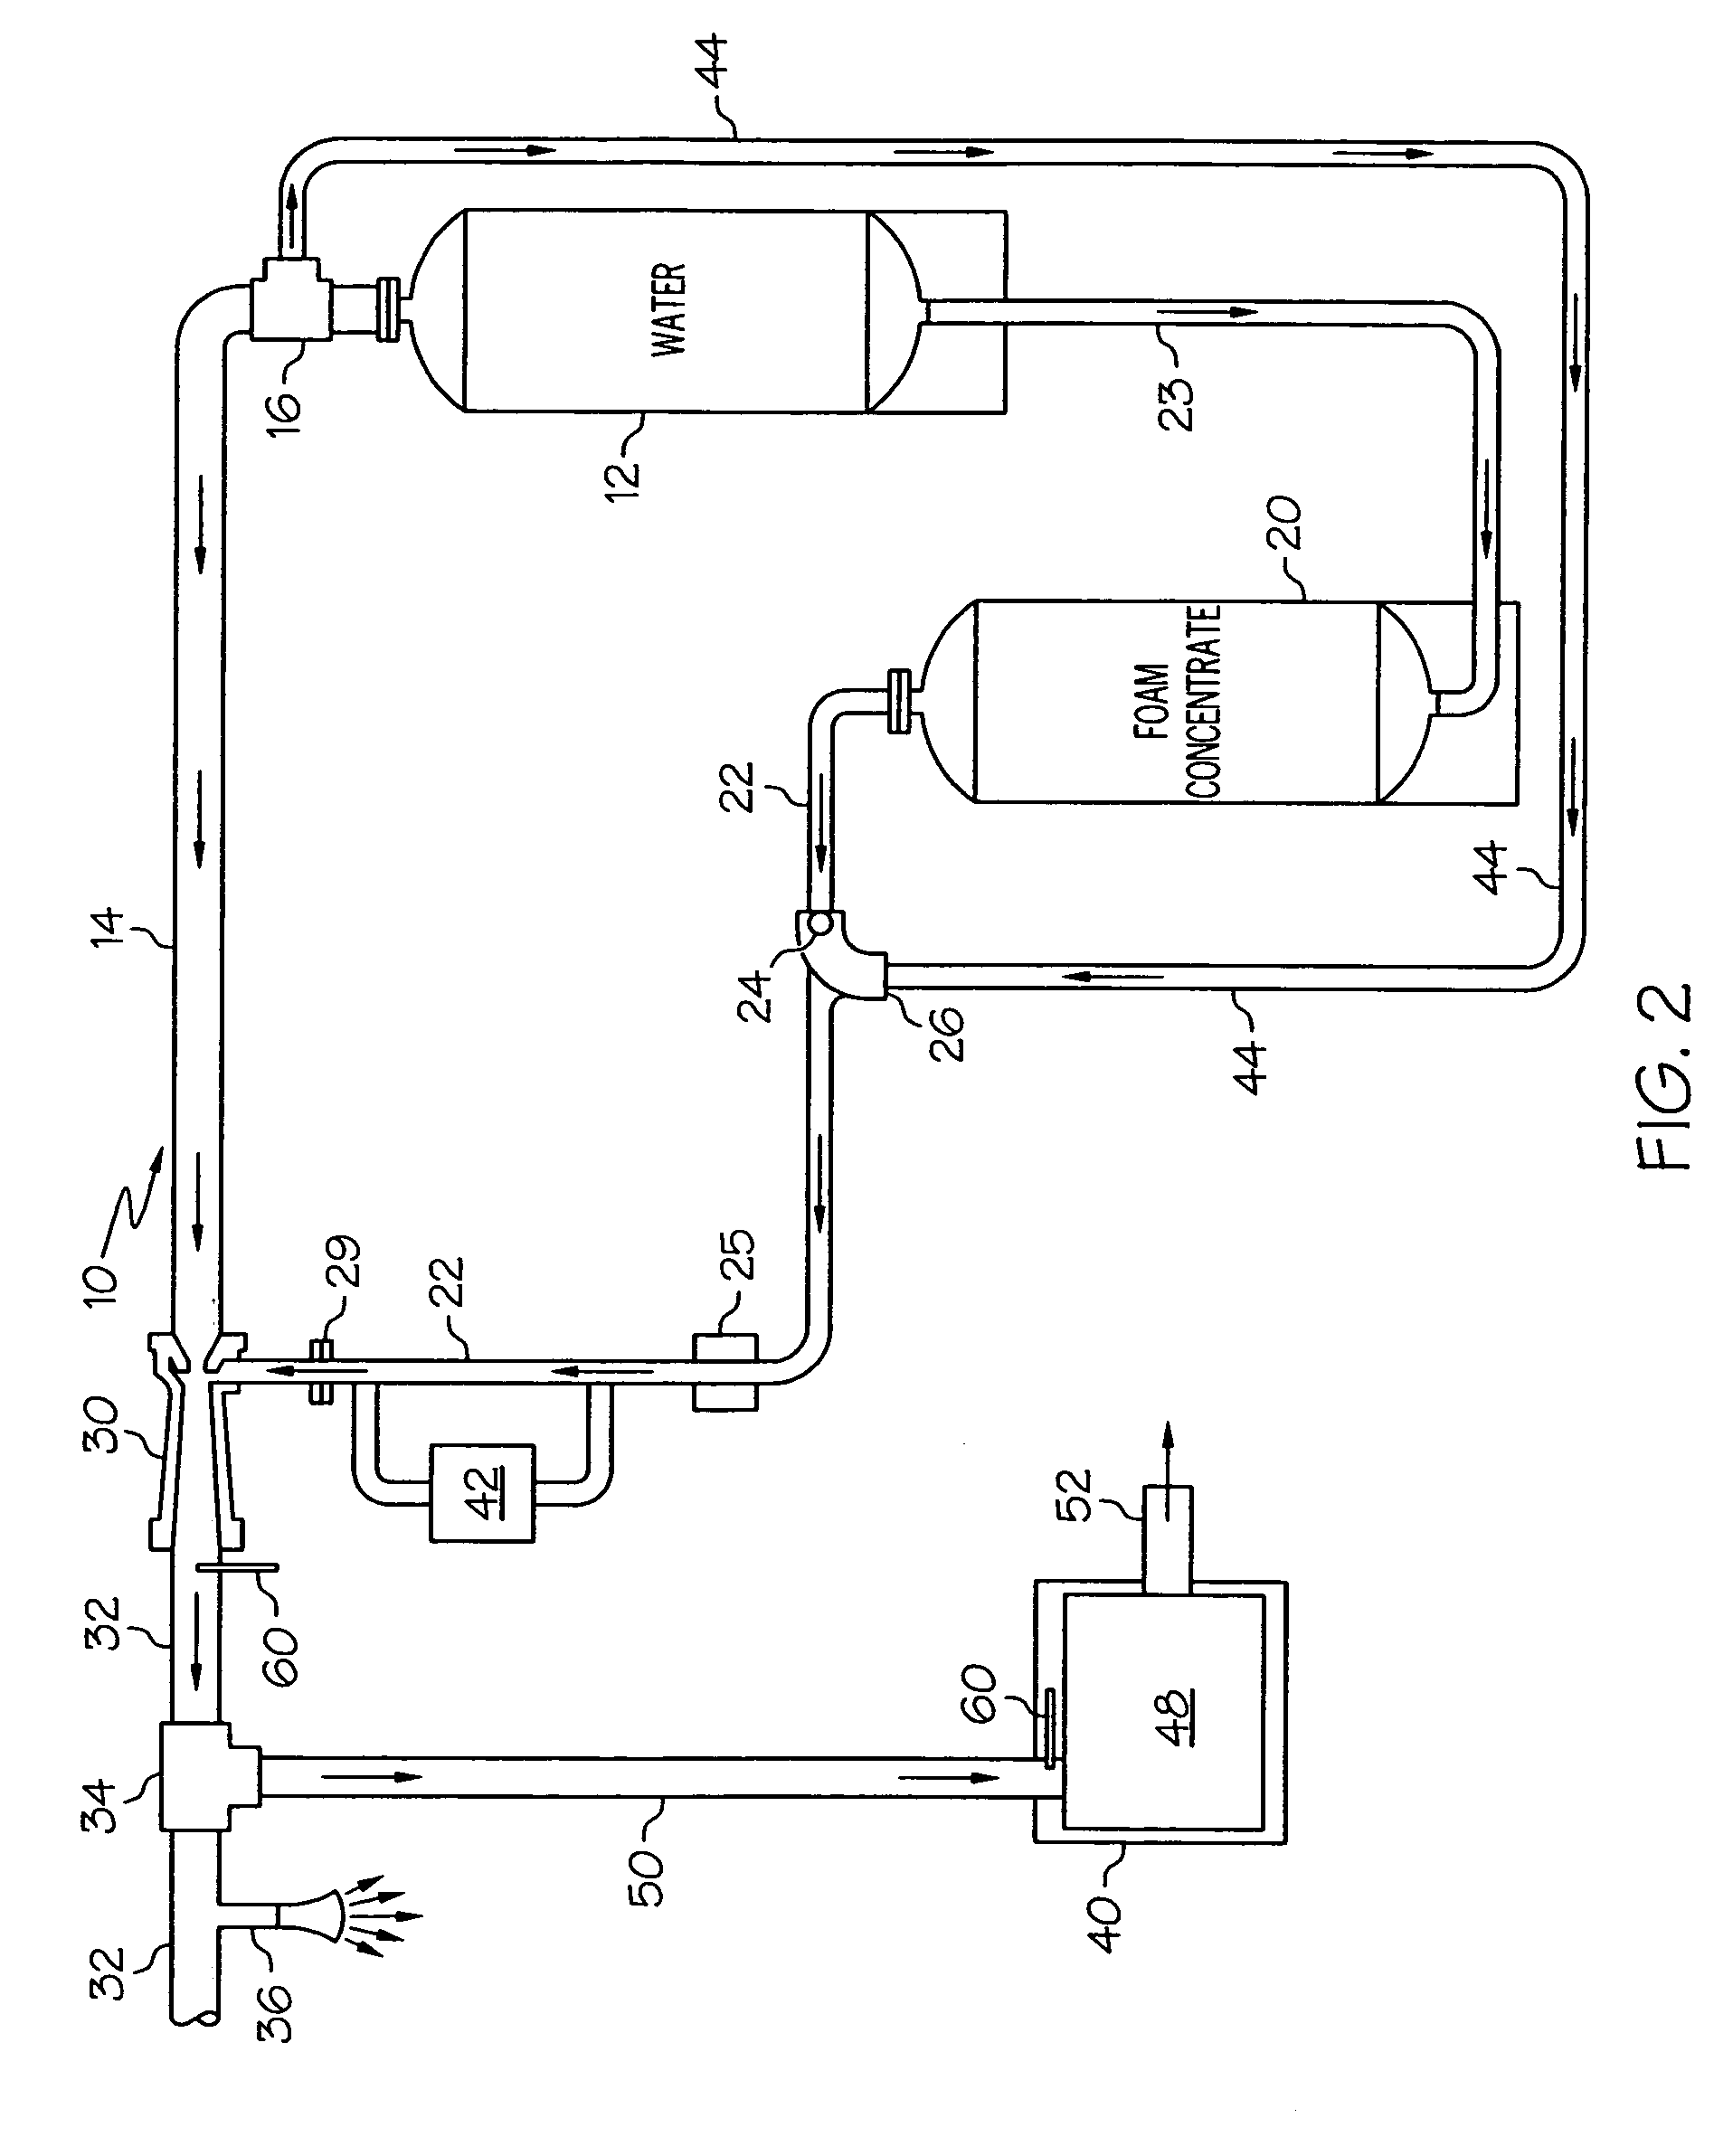 System and method for testing foam-water fire fighting and fire suppression systems